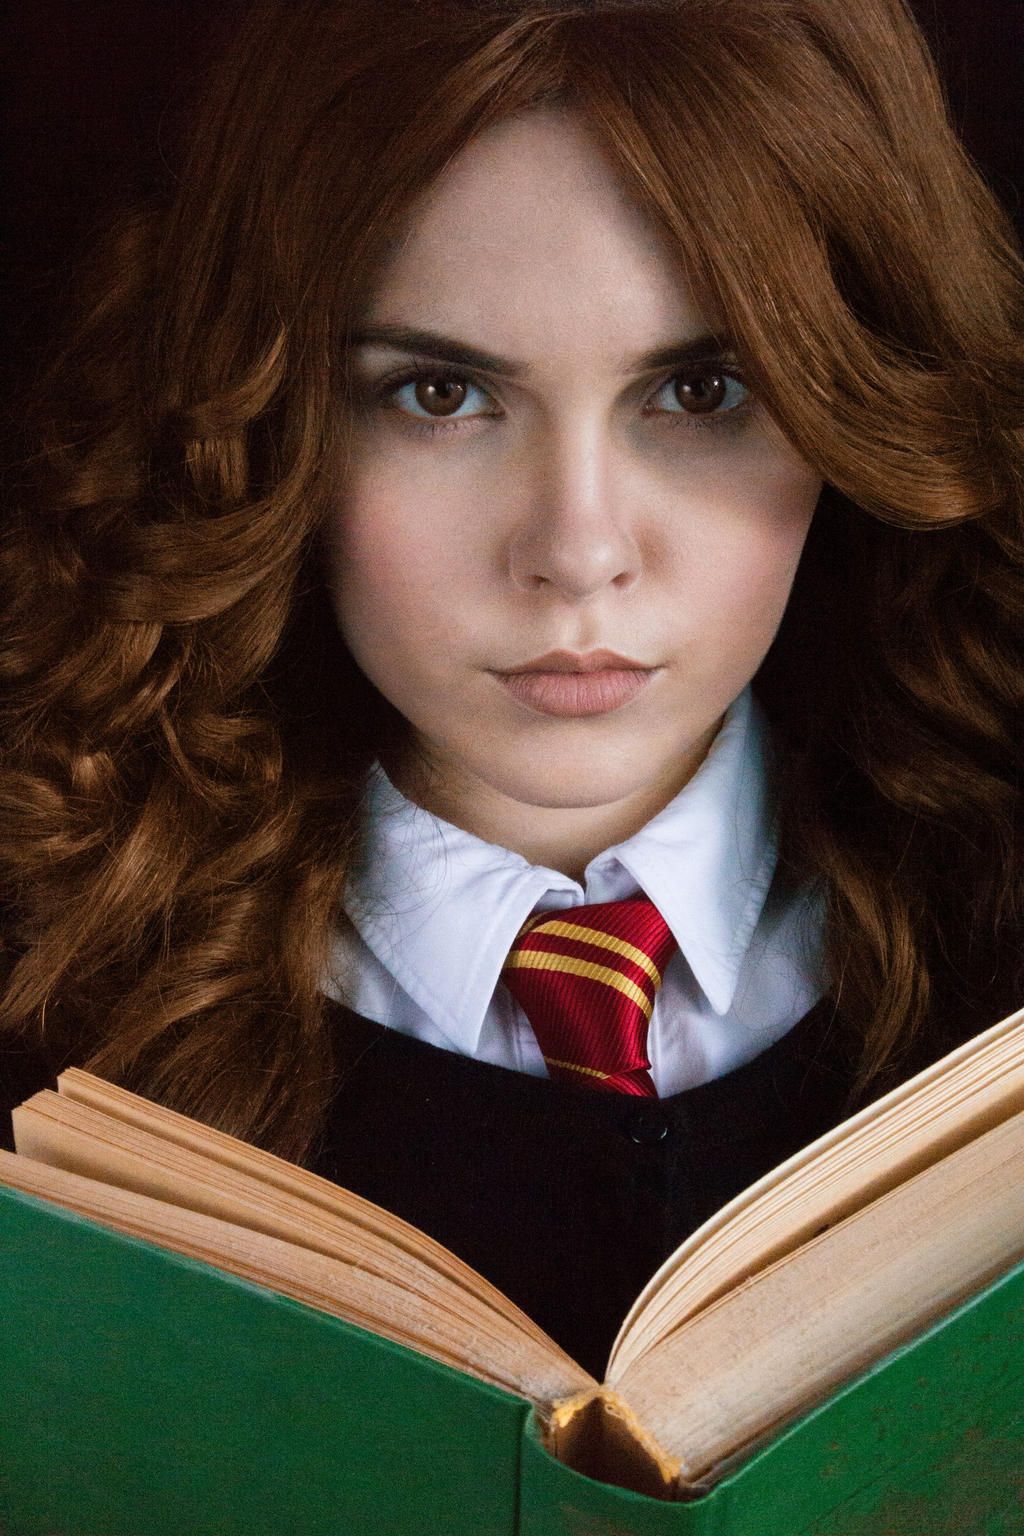 Hermione Granger cosplay from Harry Potter by Immeari on DeviantArt